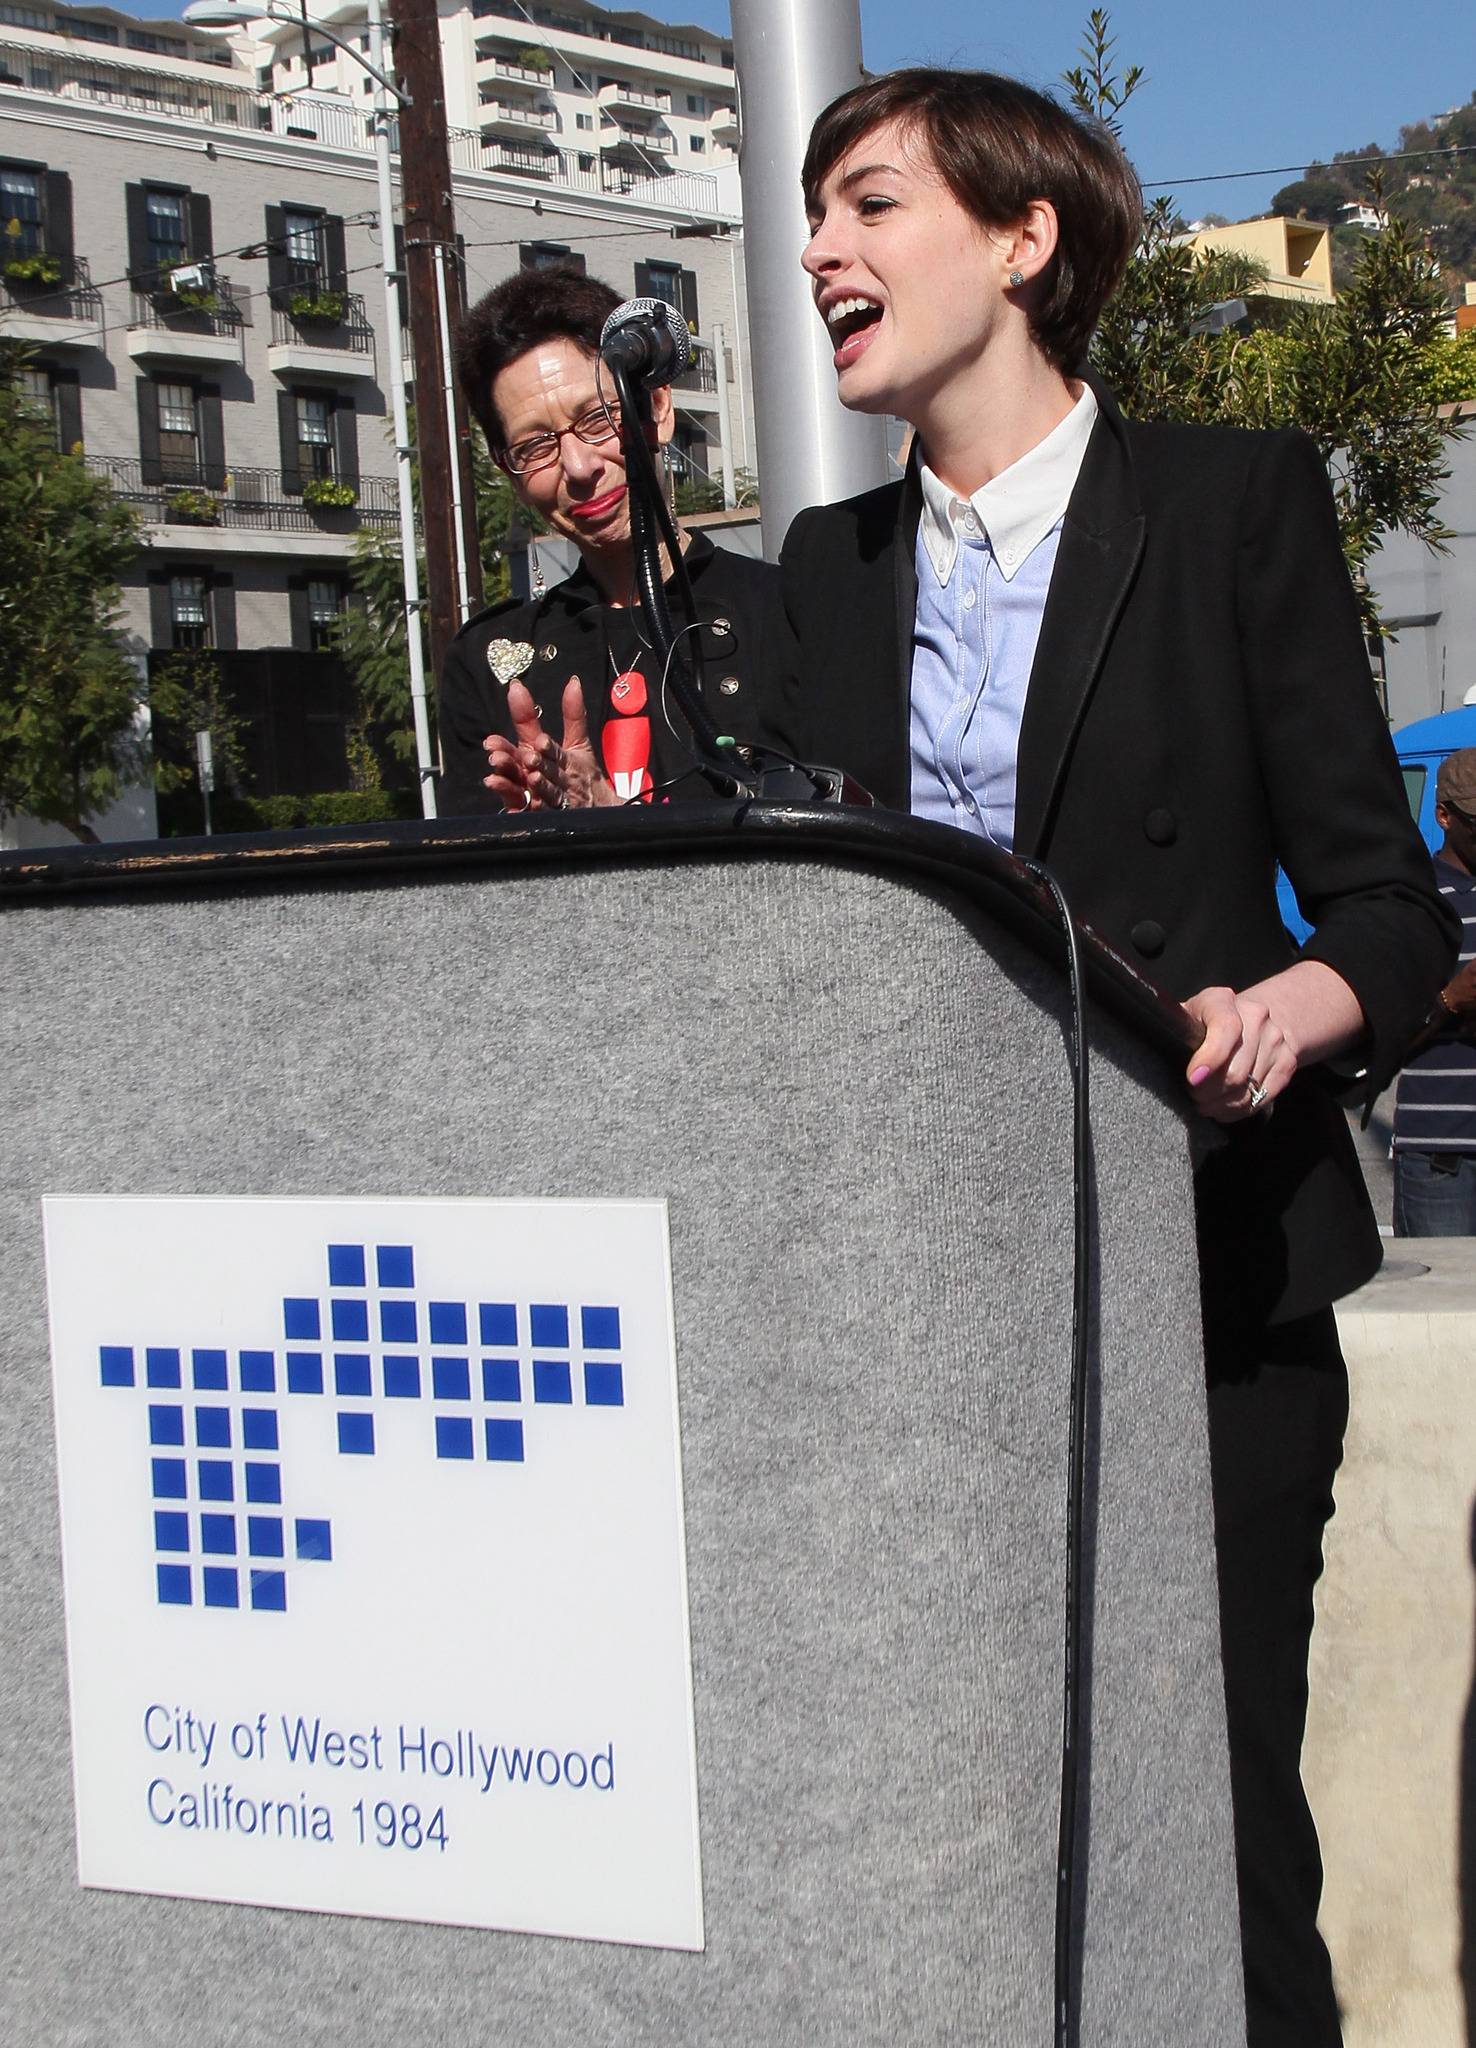 Anne Hathaway (R) and City of West Hollywood Mayor Pro Tempore Abbe Land attend the kick-off for One Billion Rising in West Hollywood on February 14, 2013 in West Hollywood, California.